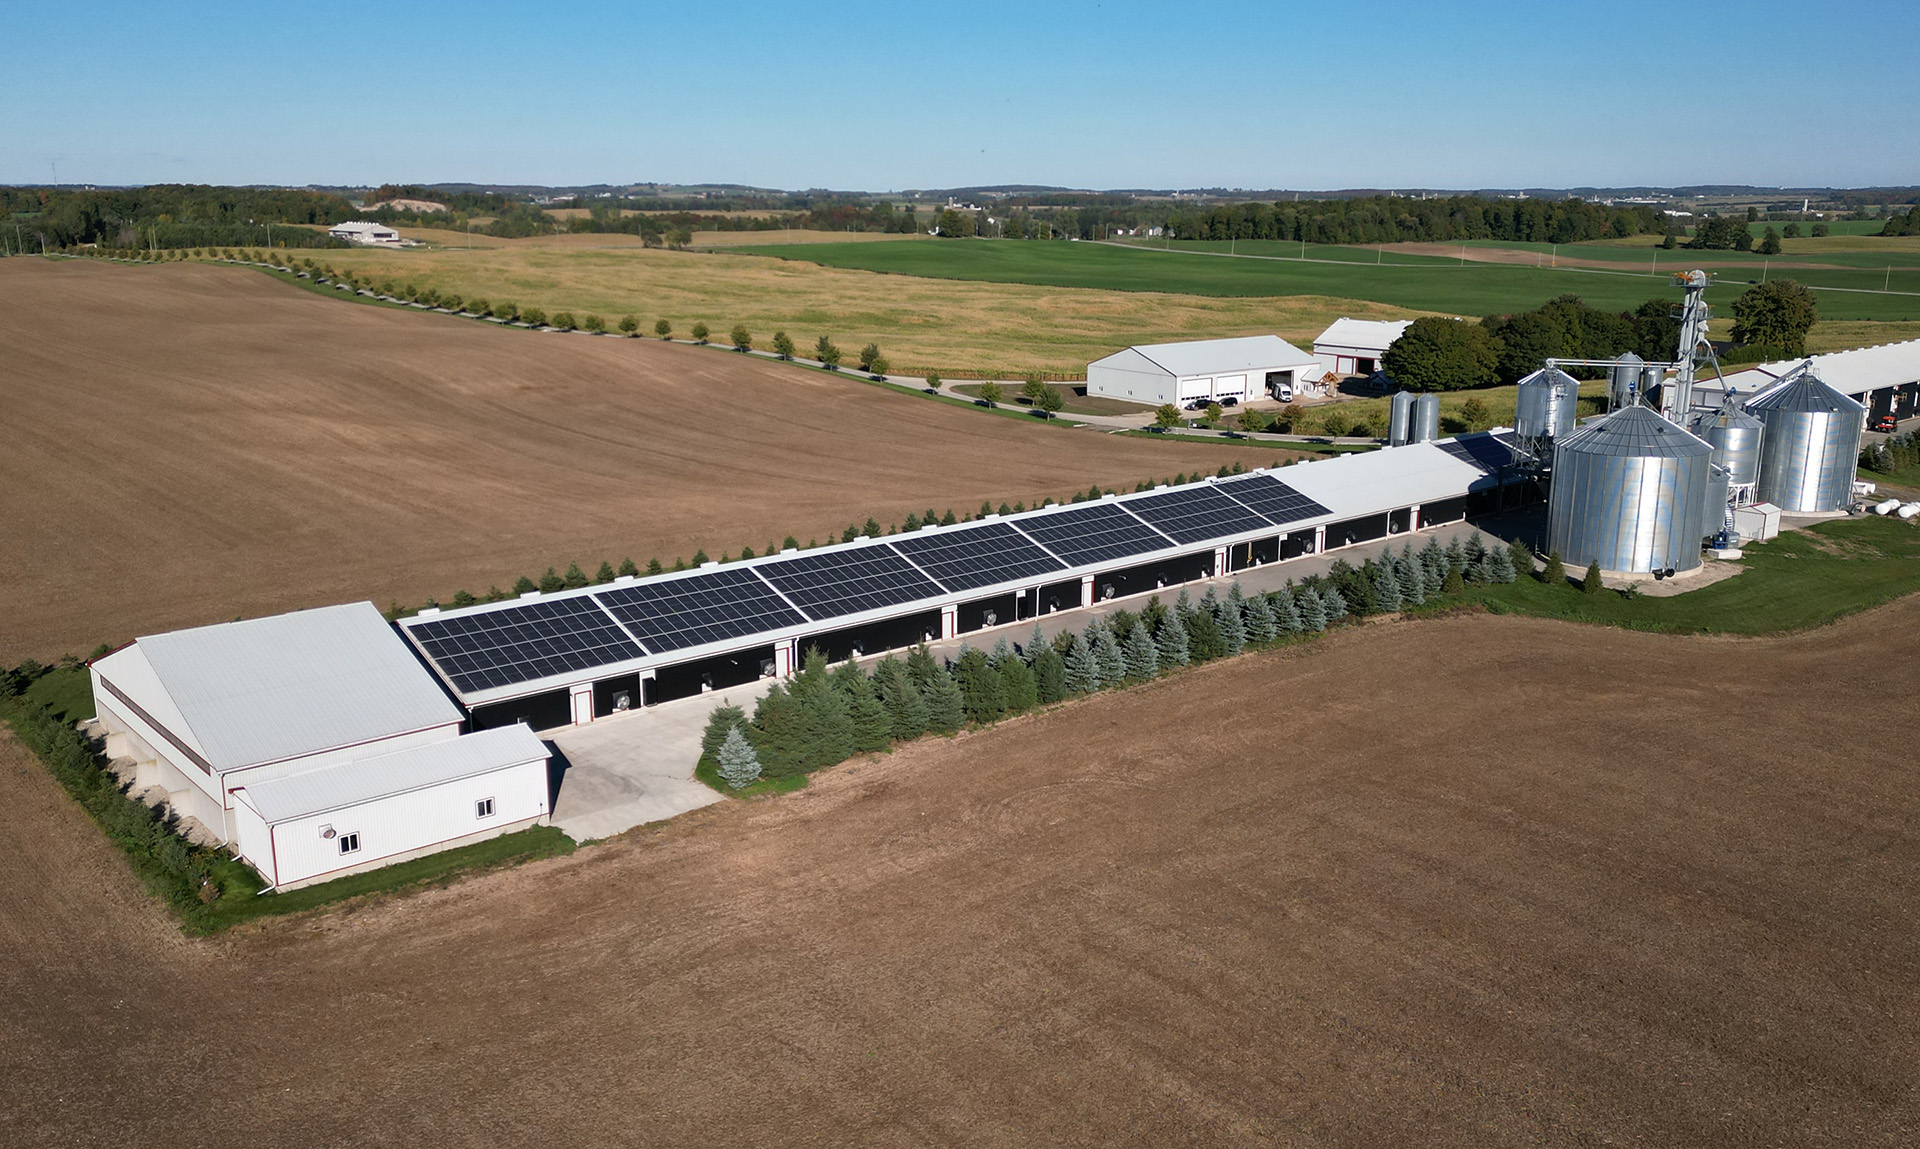 Overhead view of a farming facility with solar panels